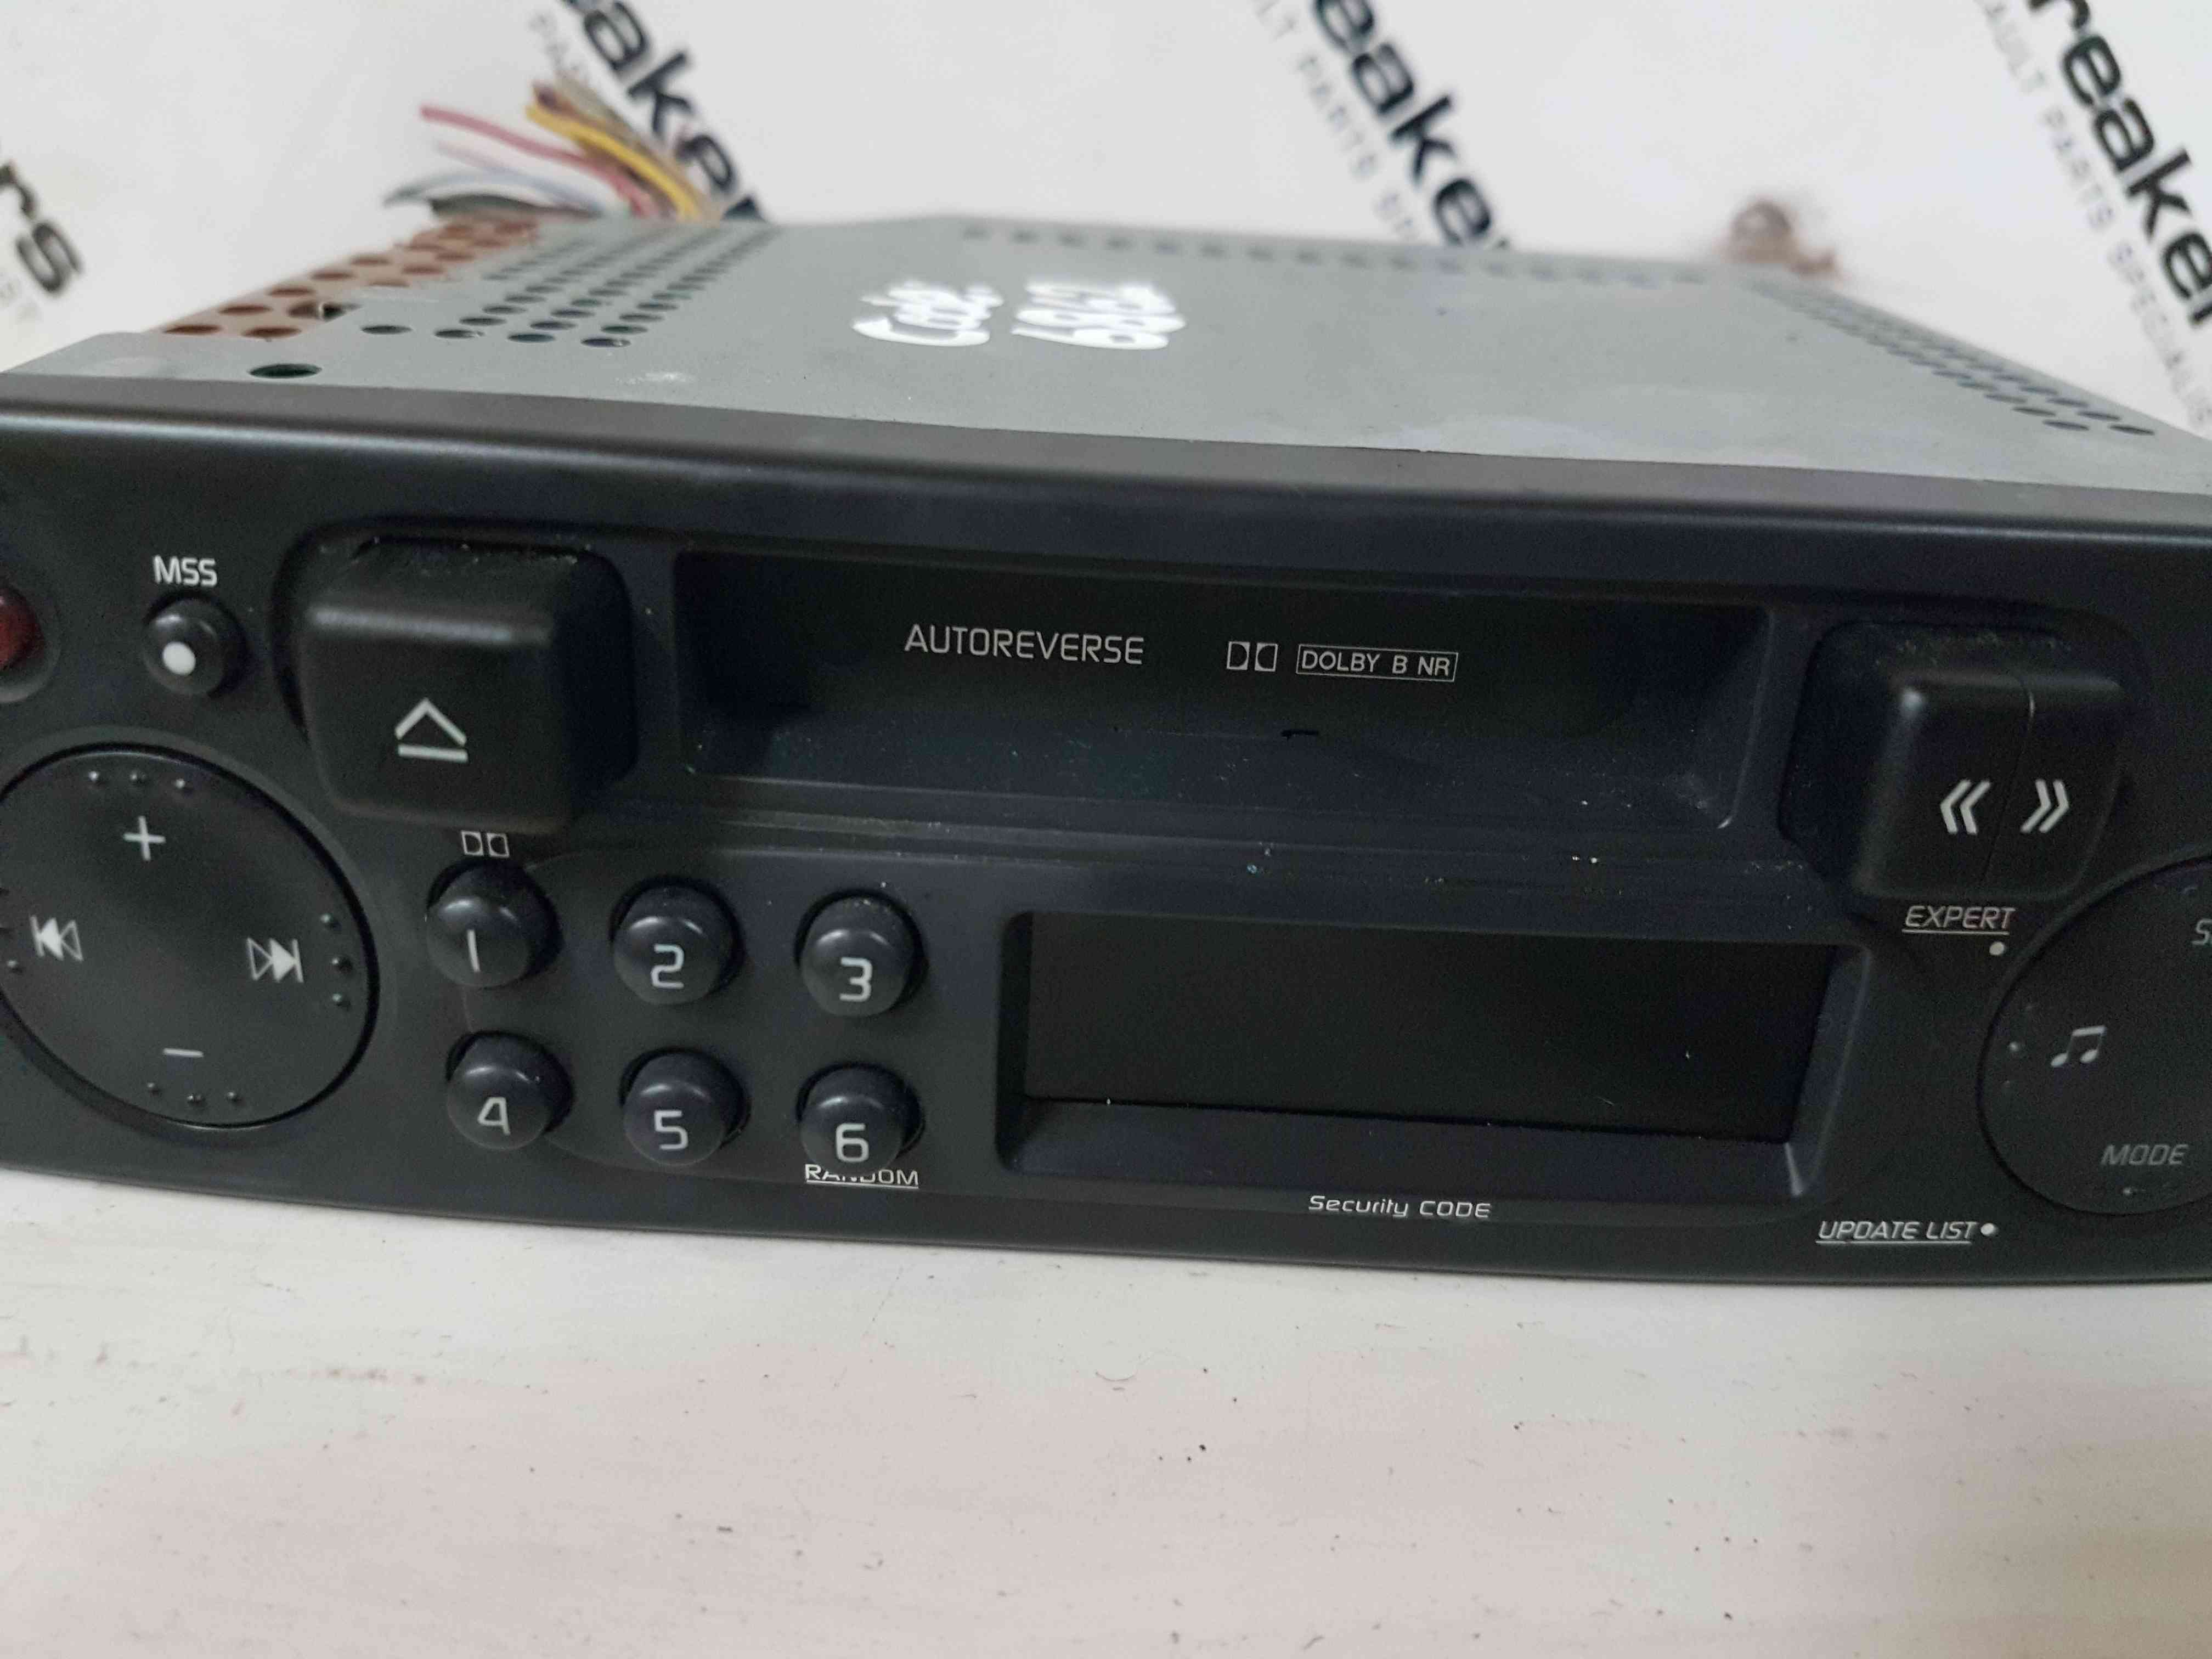 Renault Trafic 2001-2006 Radio Cd Player Tuner List - Store - Renault  Breakers - Used Renault Car Parts & Spares Specialist